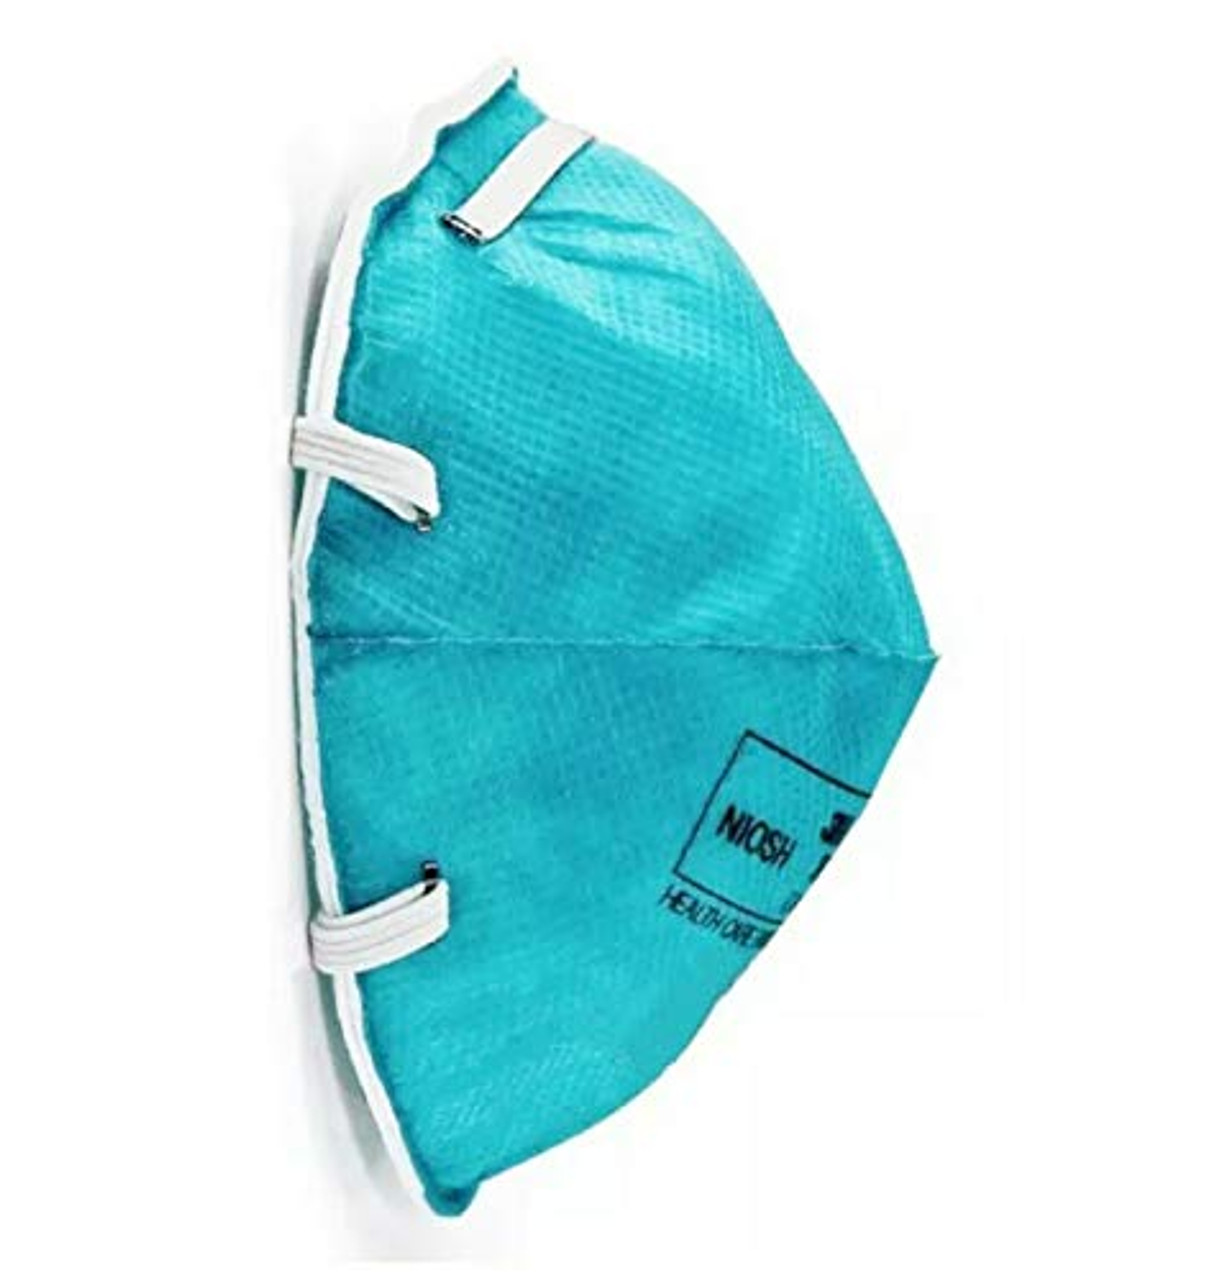 3M™ N95 1860 Health Care Surgical Respirator. 5-Pack. 99+% Filtration  Efficiency. Size: Regular or Small